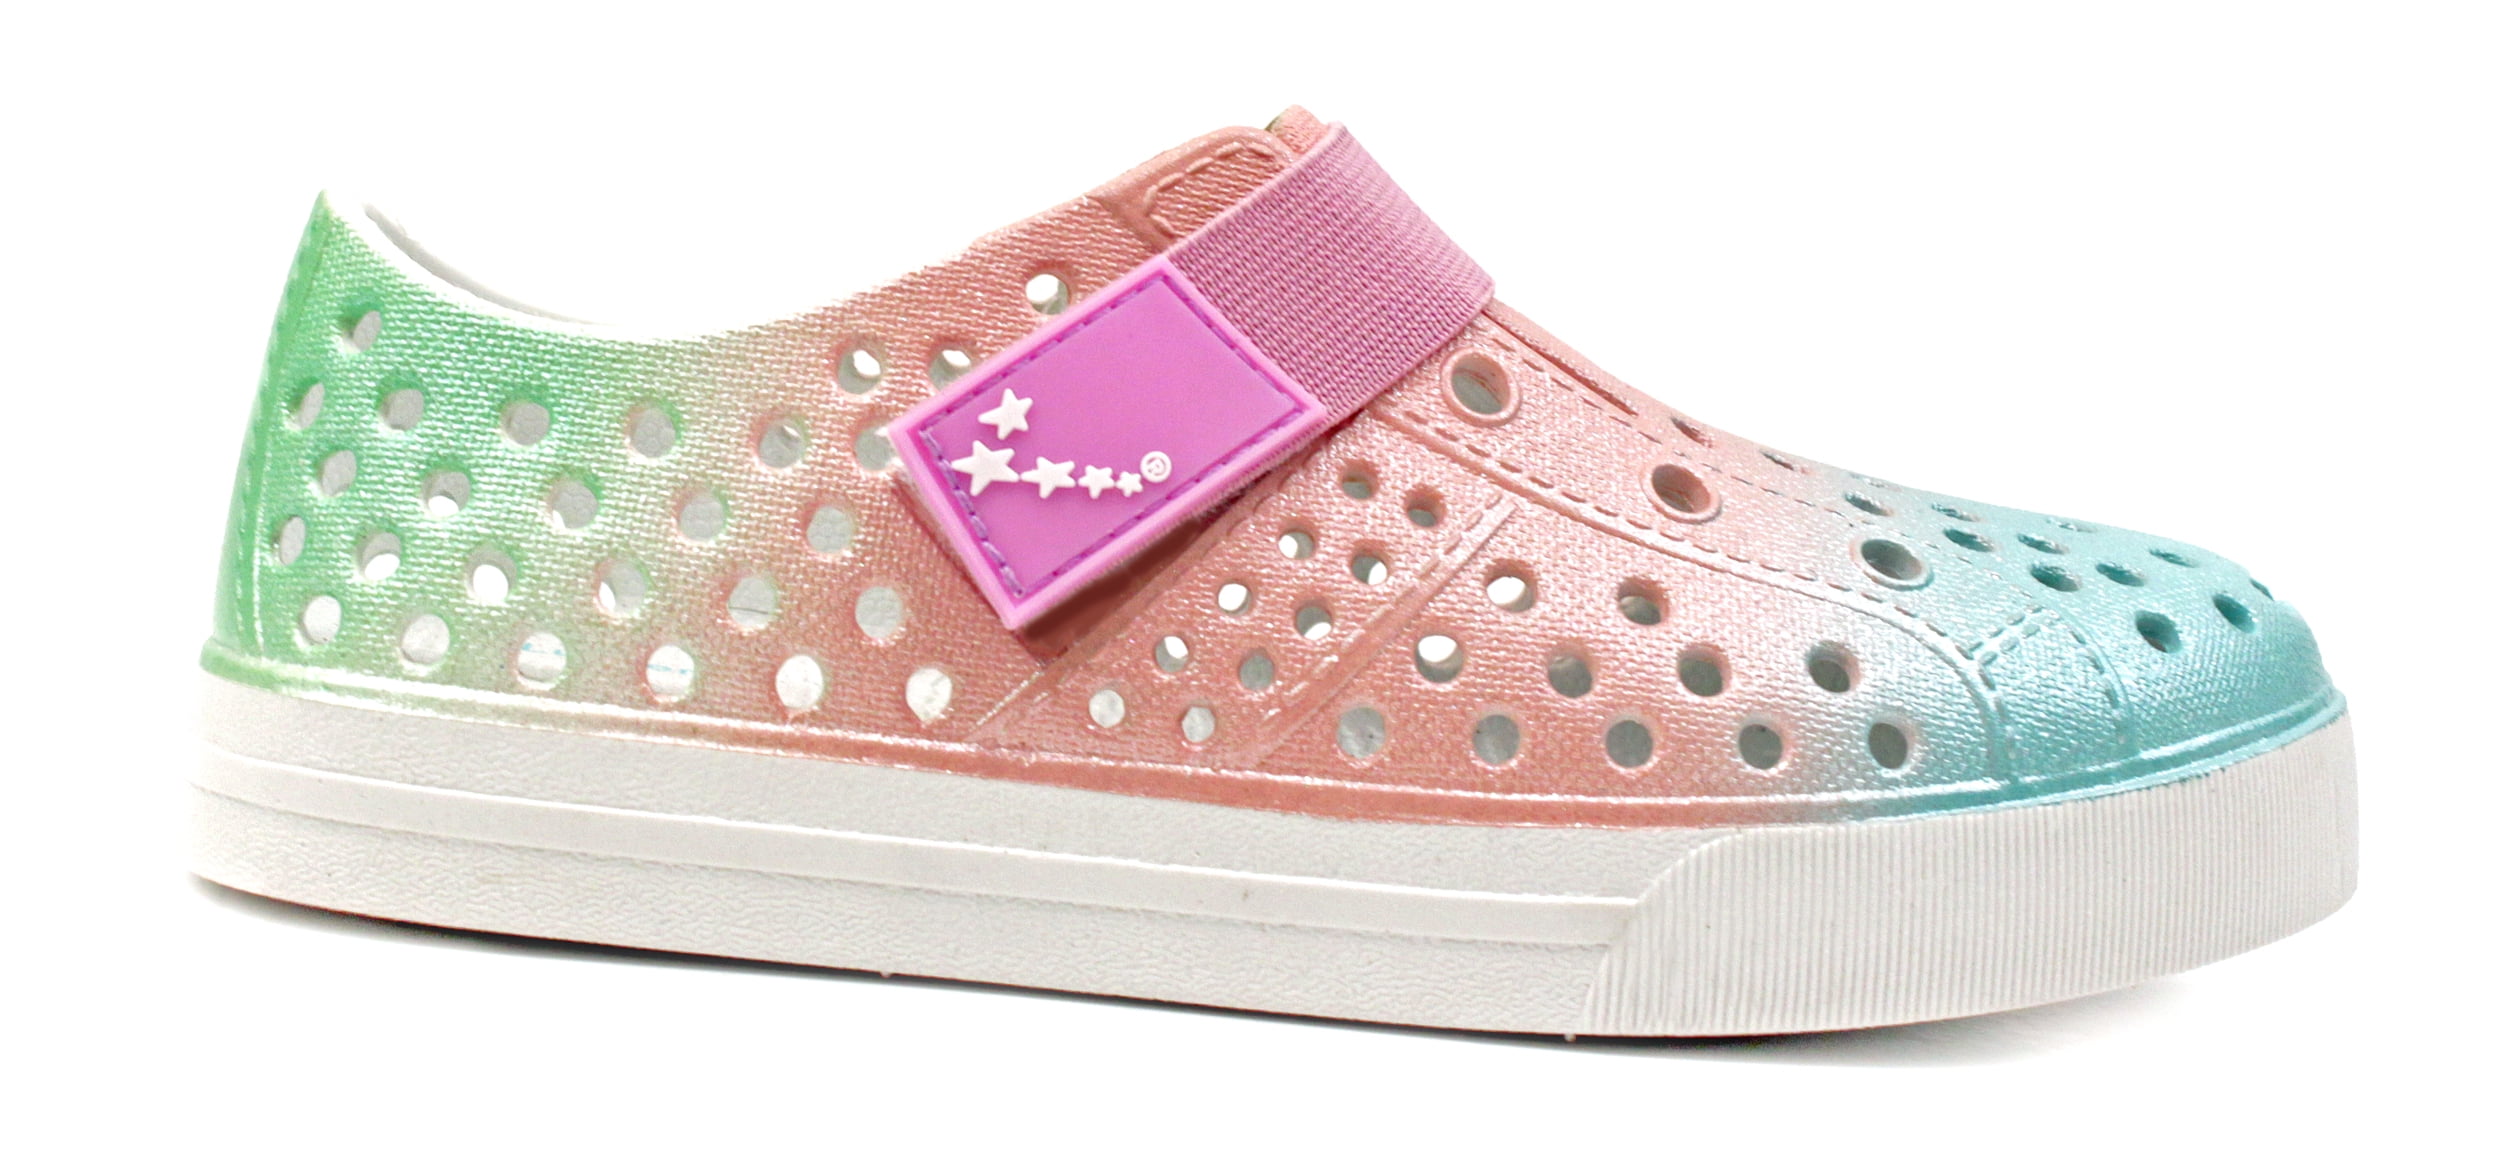 Luckers Kids Beautiful Colored Water Shoes, Color: Sparkle Pink Pastel,  Size: Y1 M US Little Kid 